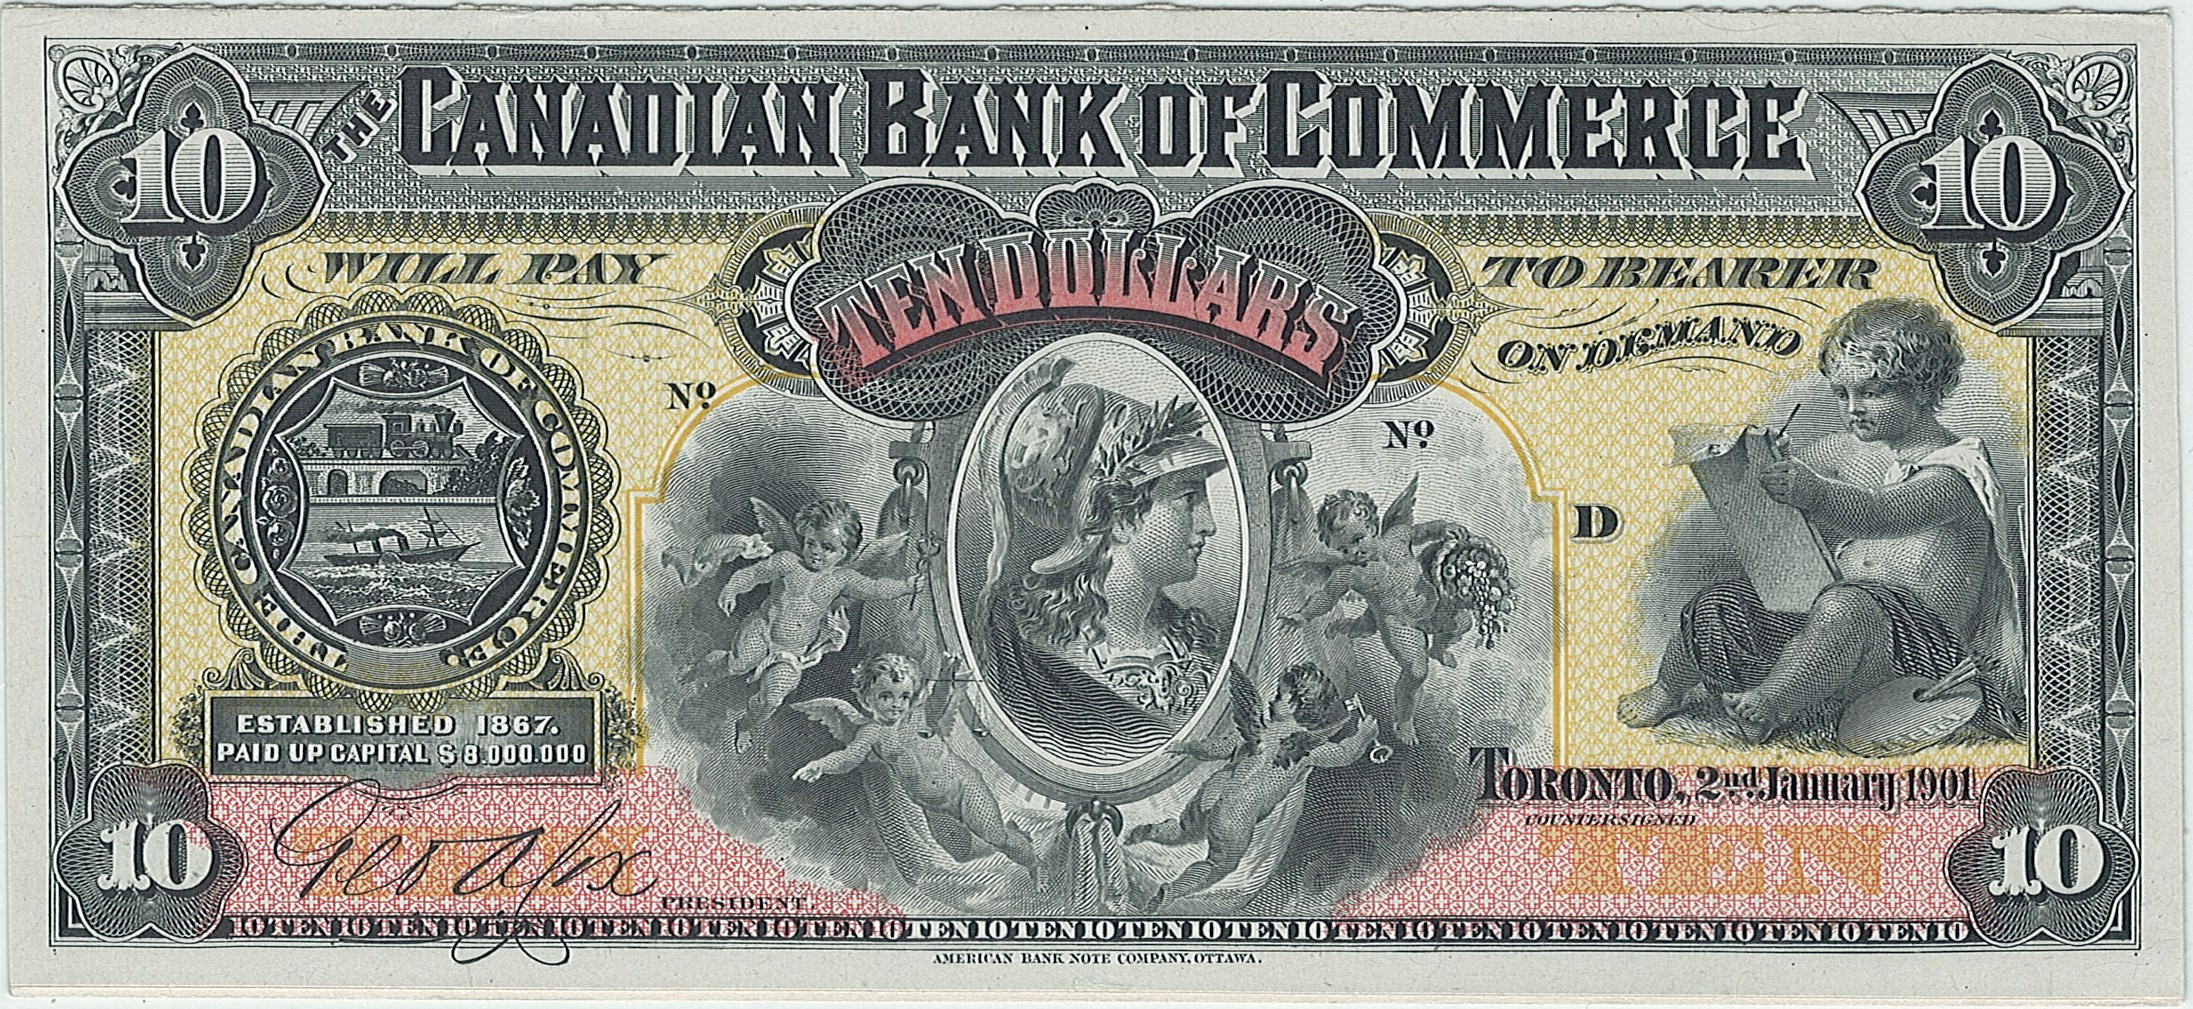 Canadian Bank of Commerce, 10$, Канада, 1901 г.